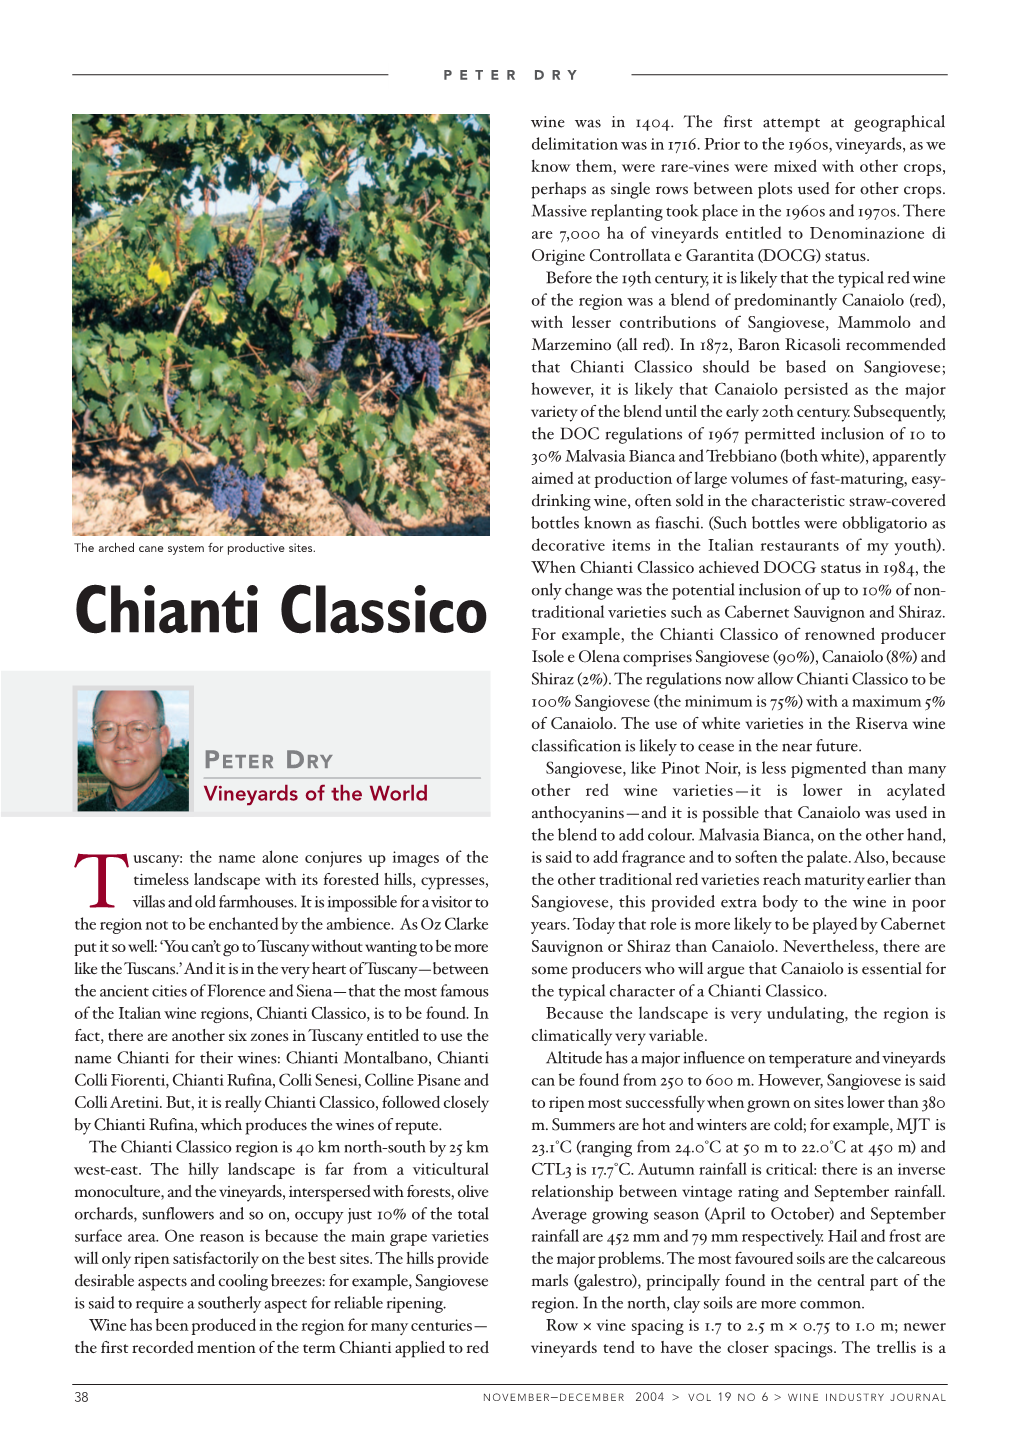 Chianti Classico Should Be Based on Sangiovese; However, It Is Likely That Canaiolo Persisted As the Major Variety of the Blend Until the Early 20Th Century